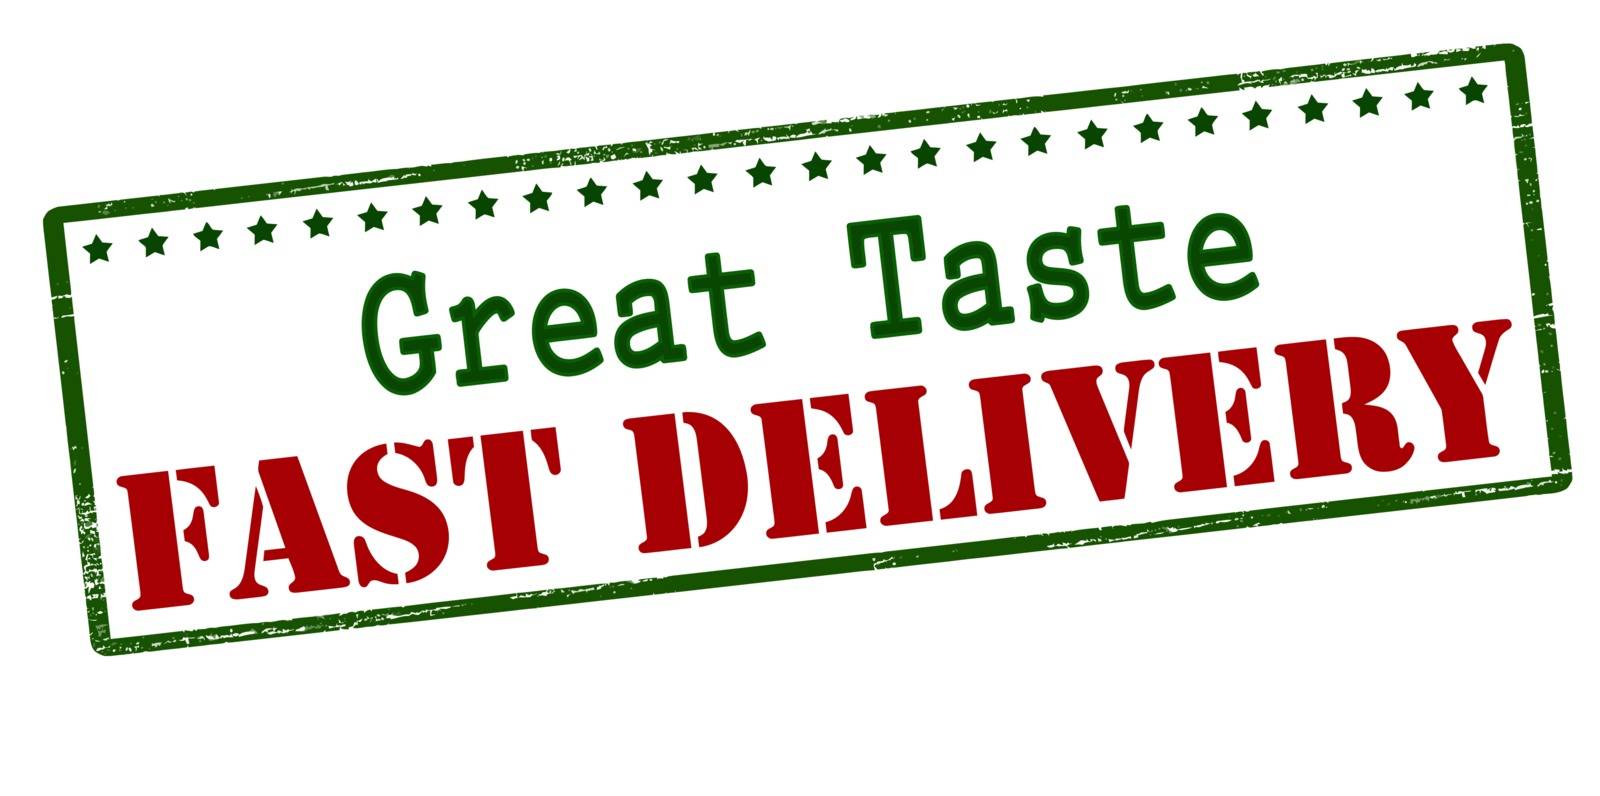 Great taste fast delivery by carmenbobo